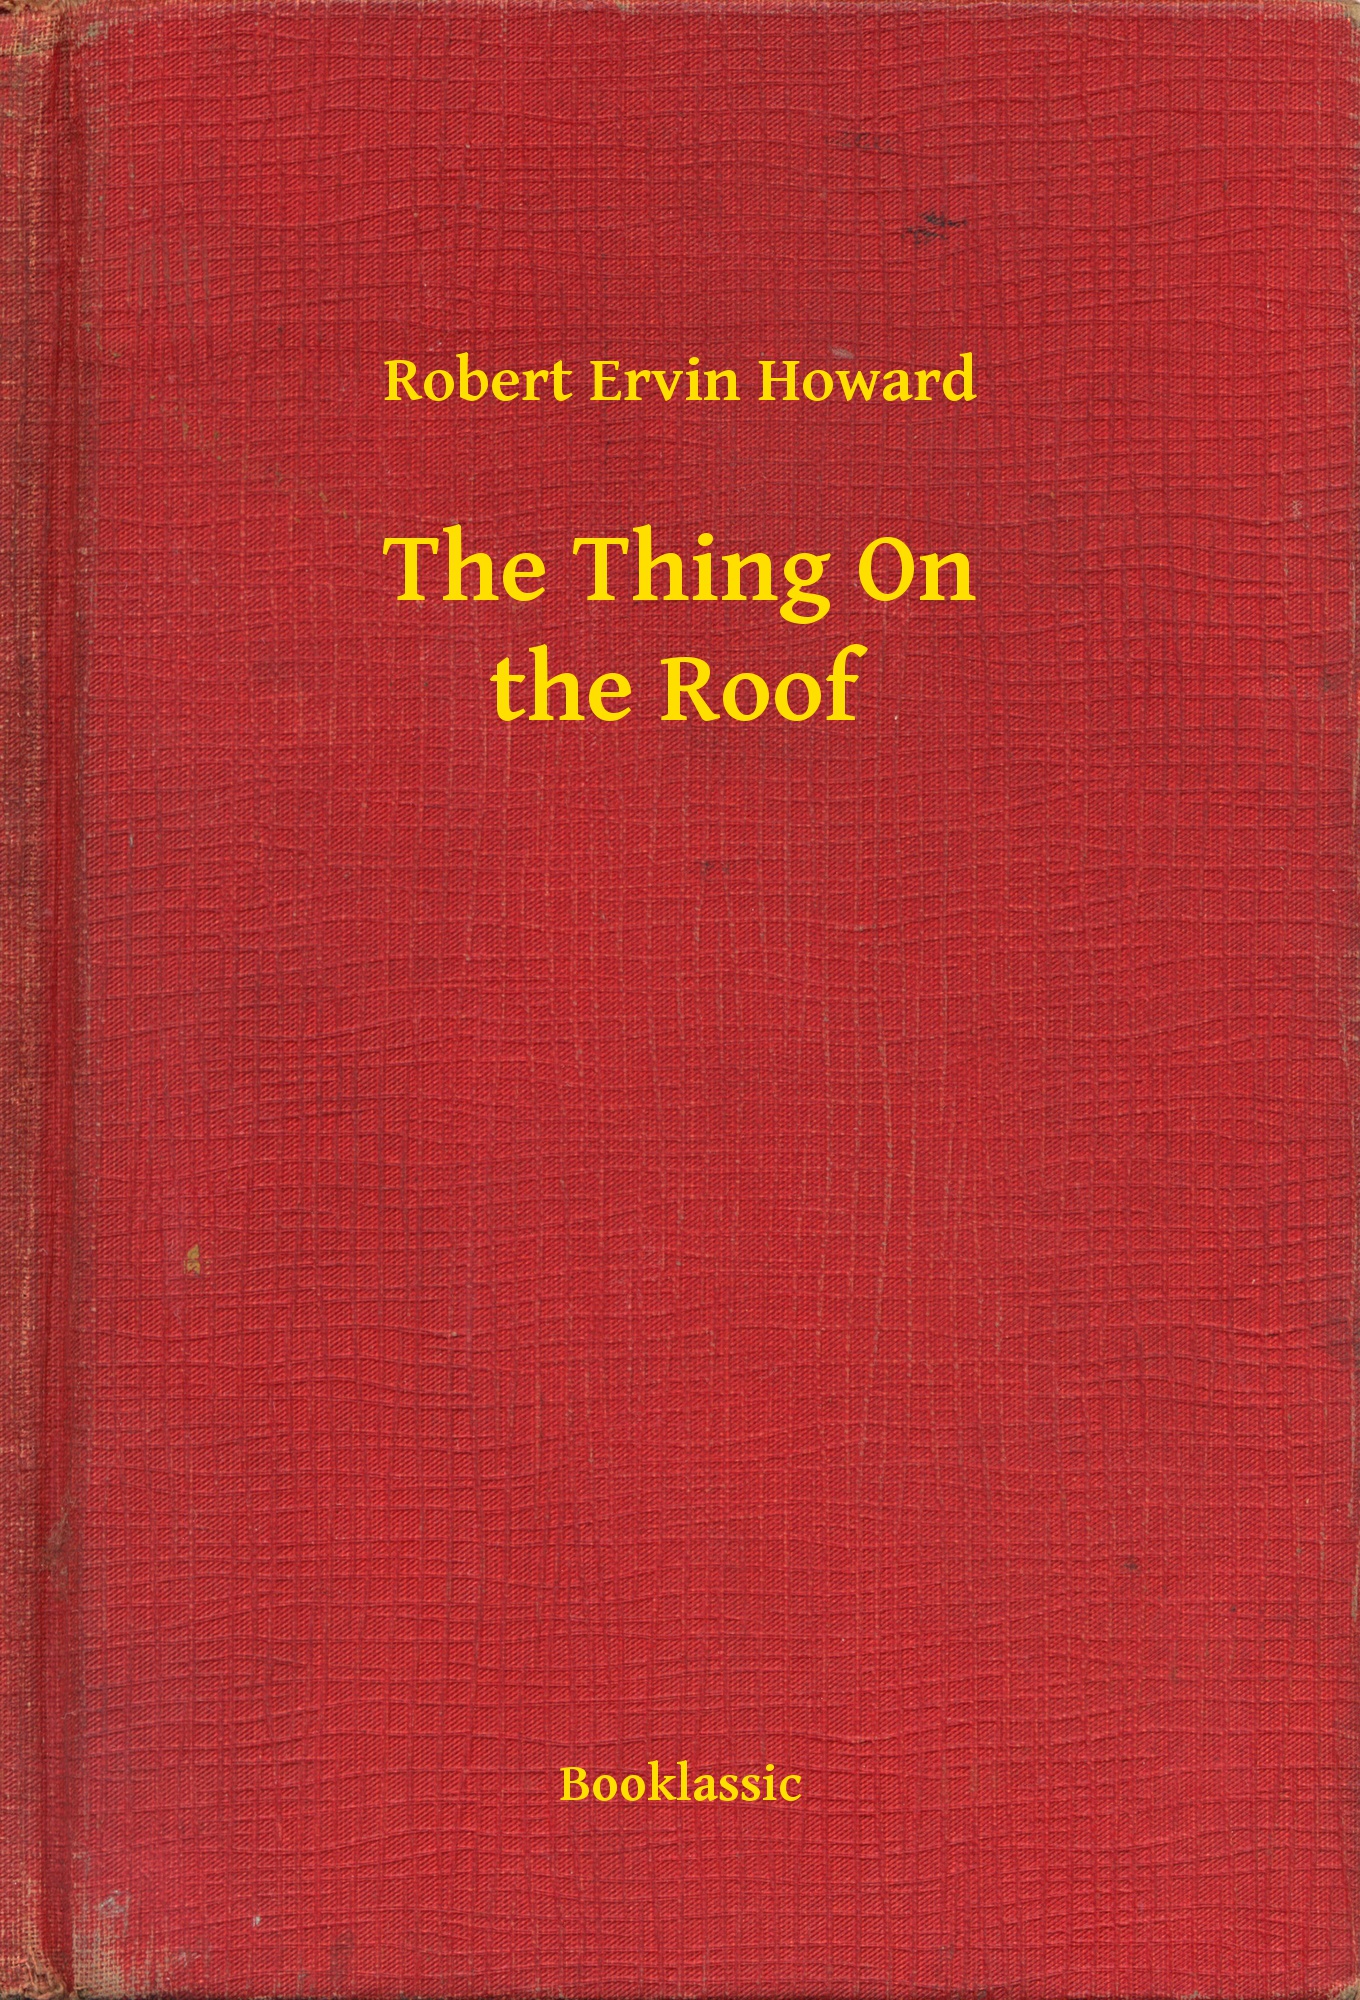 The Thing On the Roof